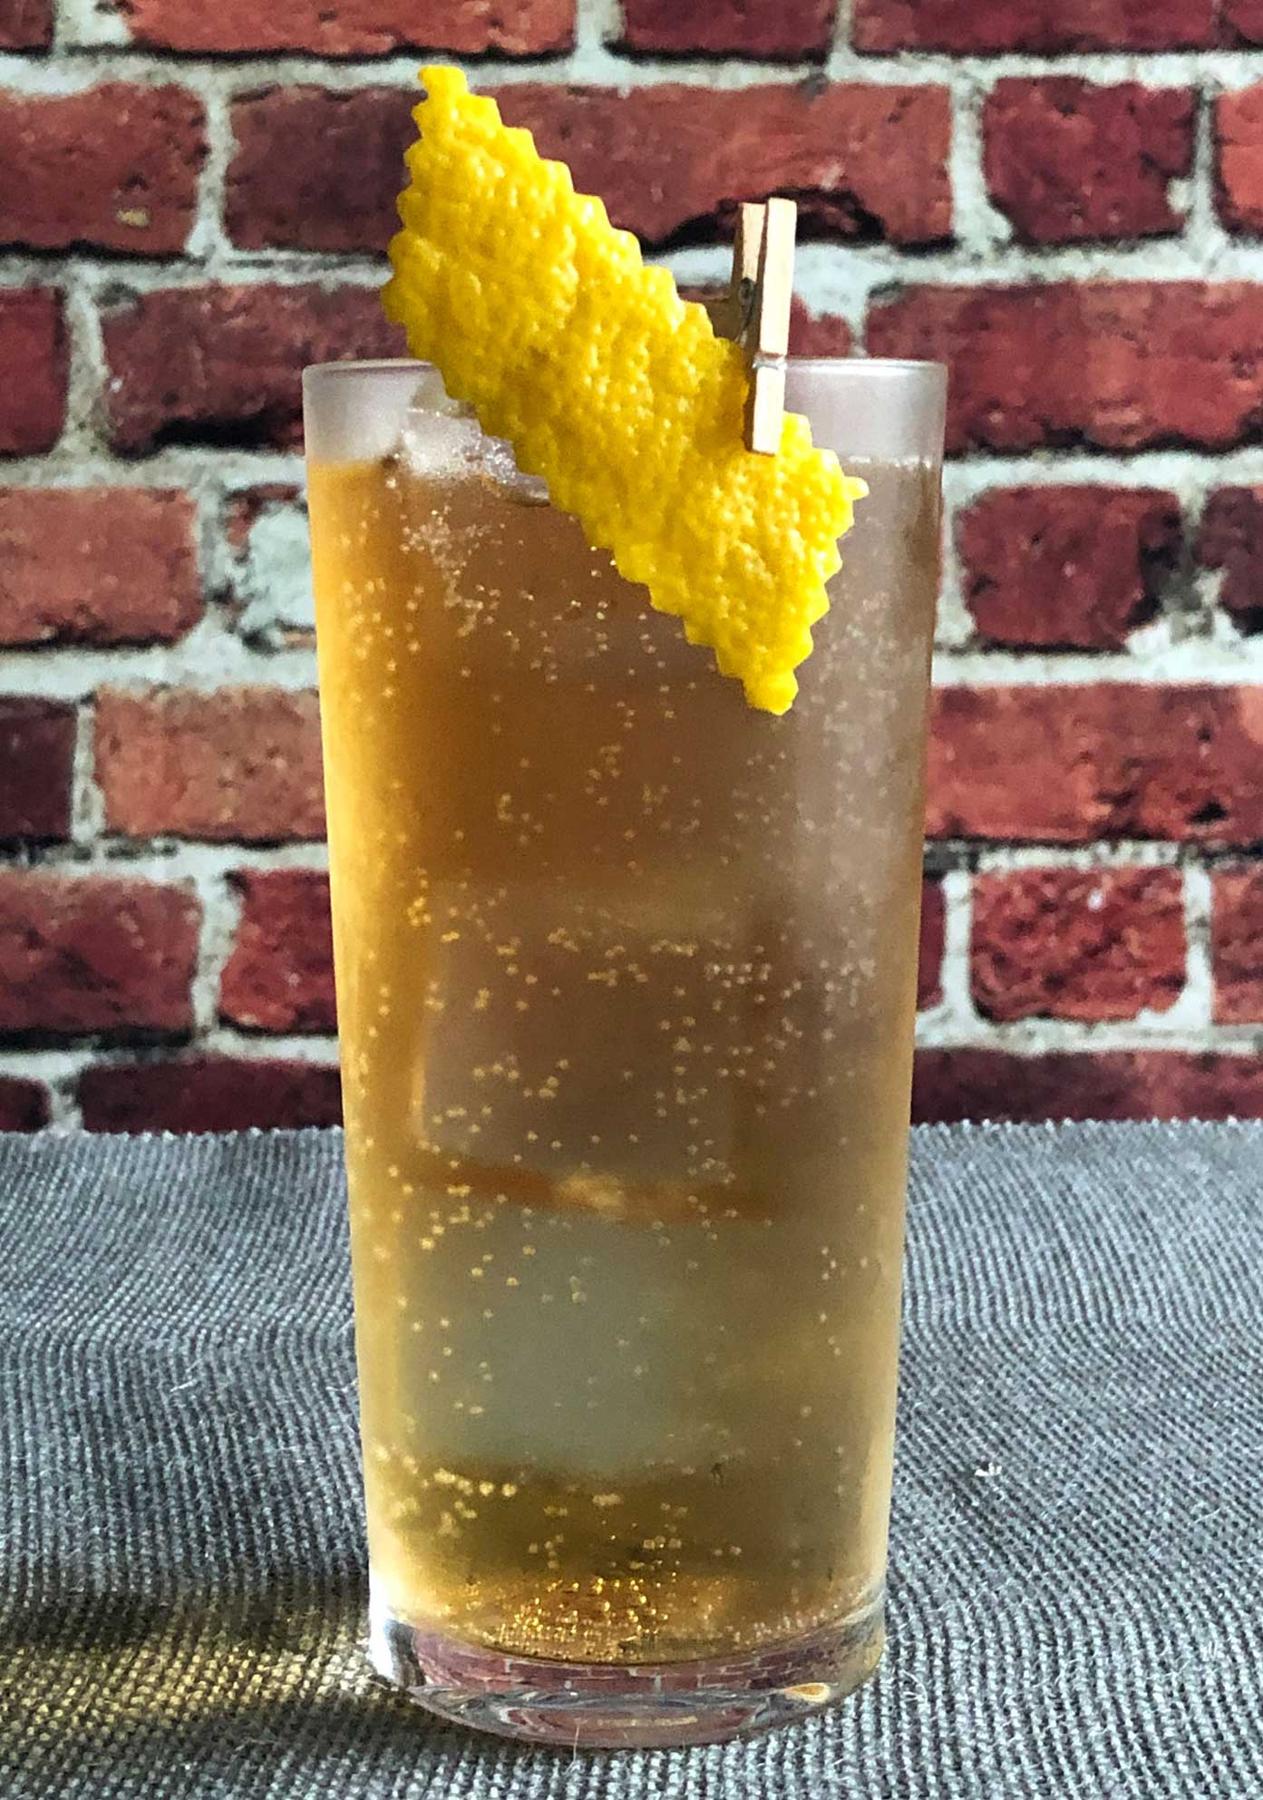 An example of the Digging in the Dirt, the mixed drink (drink) featuring tonic water, Salers Gentian Apéritif, Cardamaro Vino Amaro, and lemon twist; photo by Lee Edwards